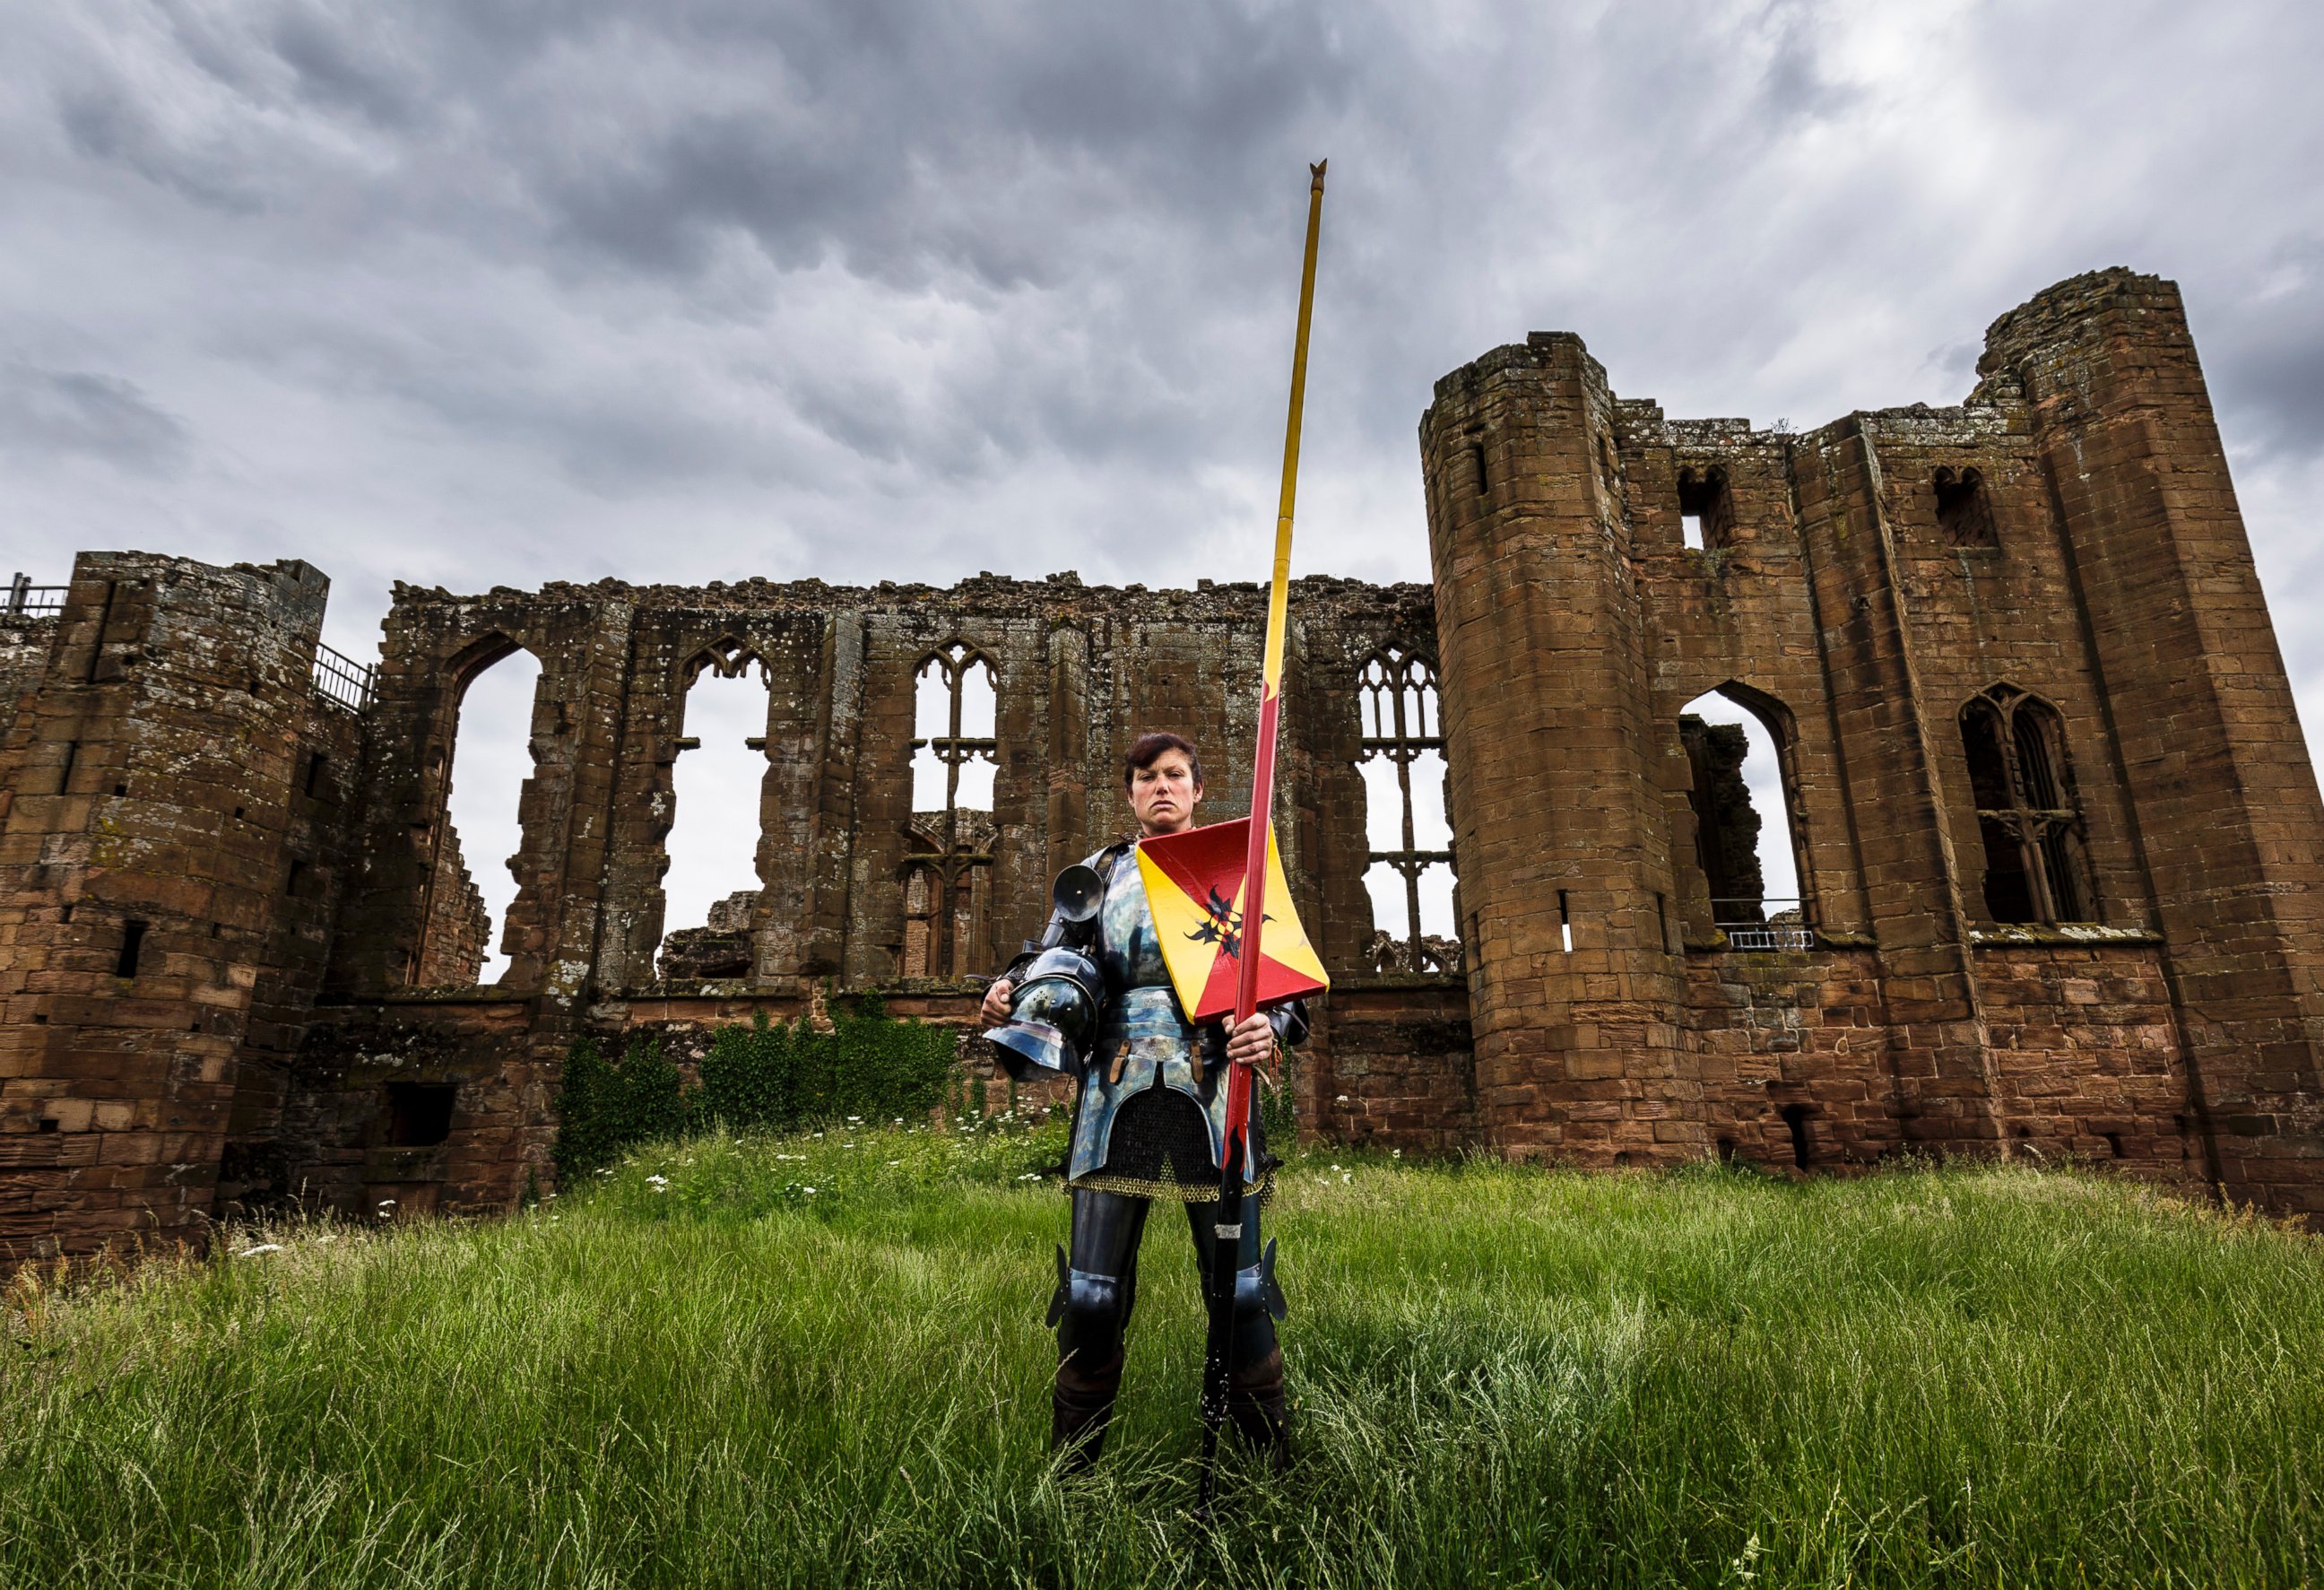 PHOTO: Women will be joining joust tournaments hosted at English Heritage castles in the UK for the first time this summer. Female jouster, Nicky Willis shown at Kenilworth Castle, Warwickshire, UK. 